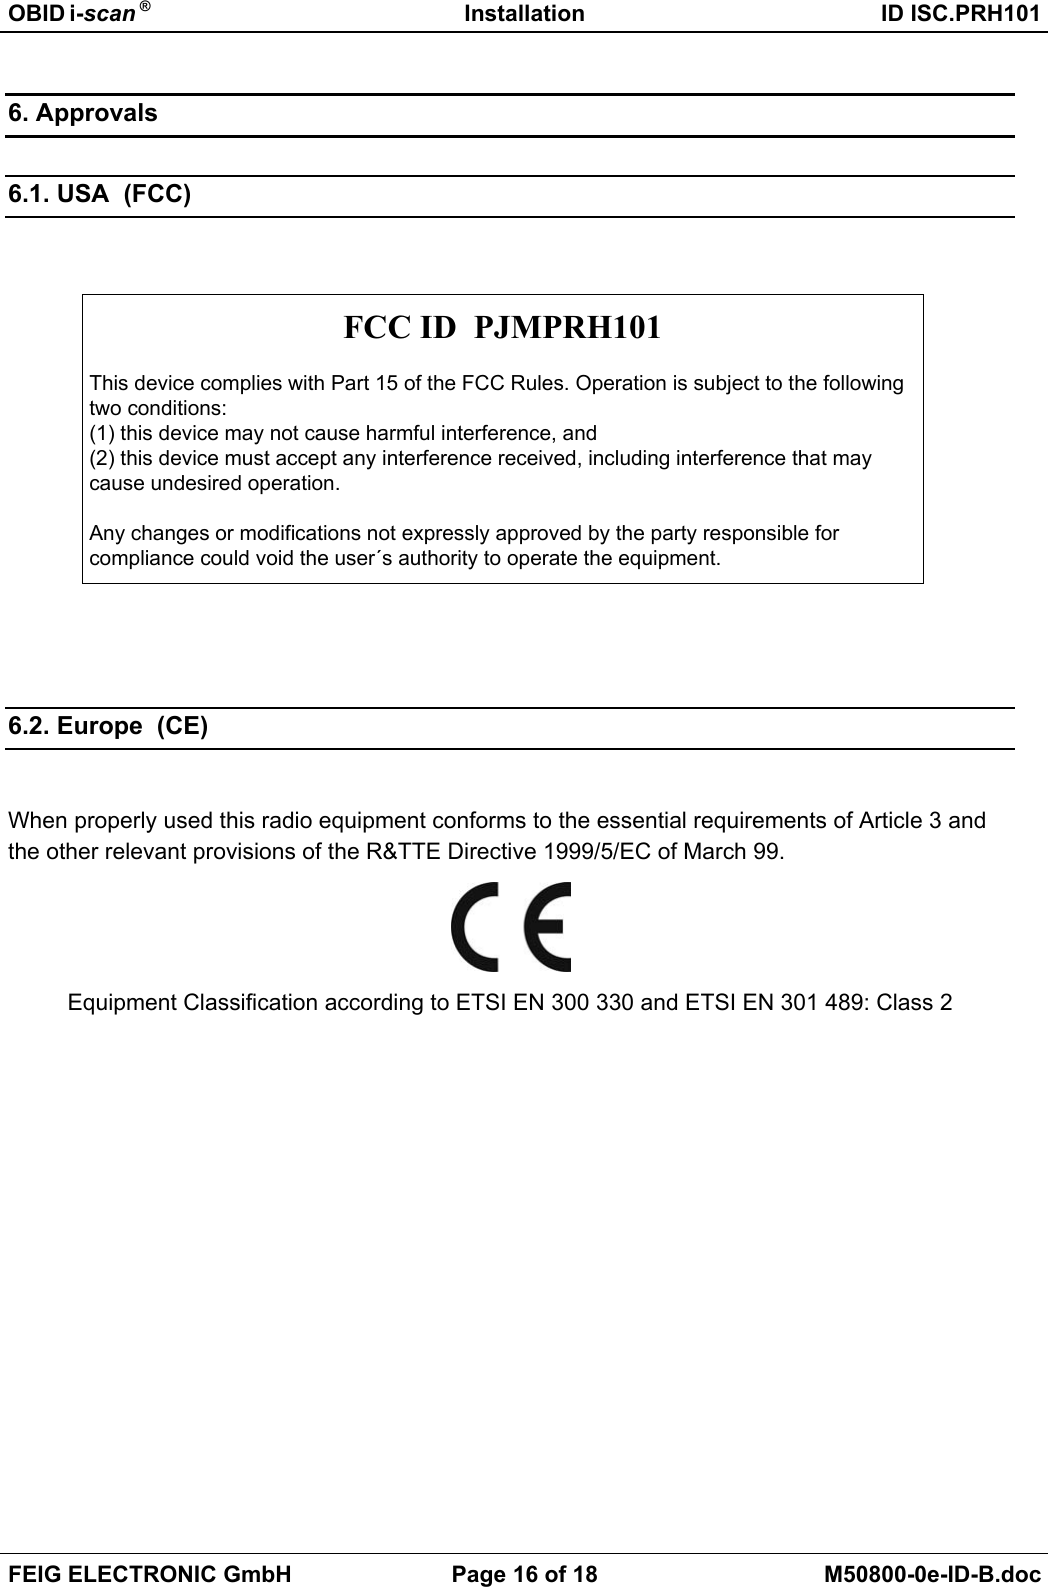 OBID i-scan ® Installation ID ISC.PRH101FEIG ELECTRONIC GmbH Page 16 of 18 M50800-0e-ID-B.doc6. Approvals6.1. USA  (FCC)FCC ID  PJMPRH101This device complies with Part 15 of the FCC Rules. Operation is subject to the followingtwo conditions:(1) this device may not cause harmful interference, and(2) this device must accept any interference received, including interference that maycause undesired operation.Any changes or modifications not expressly approved by the party responsible forcompliance could void the user´s authority to operate the equipment.6.2. Europe  (CE)When properly used this radio equipment conforms to the essential requirements of Article 3 andthe other relevant provisions of the R&amp;TTE Directive 1999/5/EC of March 99.Equipment Classification according to ETSI EN 300 330 and ETSI EN 301 489: Class 2